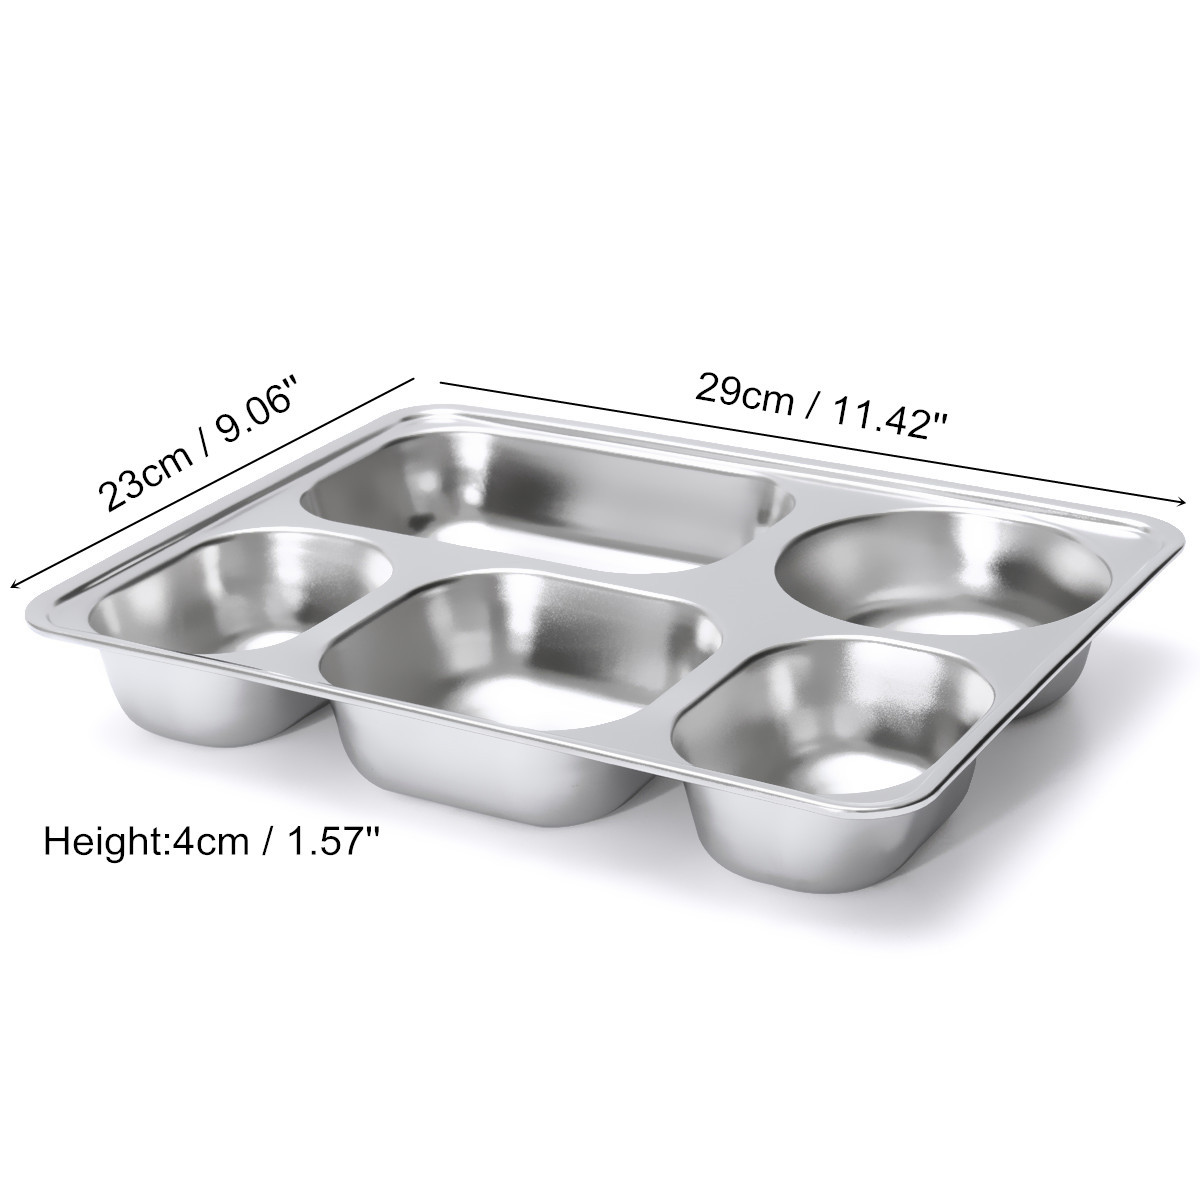 Stainless-Steel-Food-Serving-Tray-Canteen-Cafeteria-Divided-Lunch-Box-Bento-Container-with-Lid-1211432